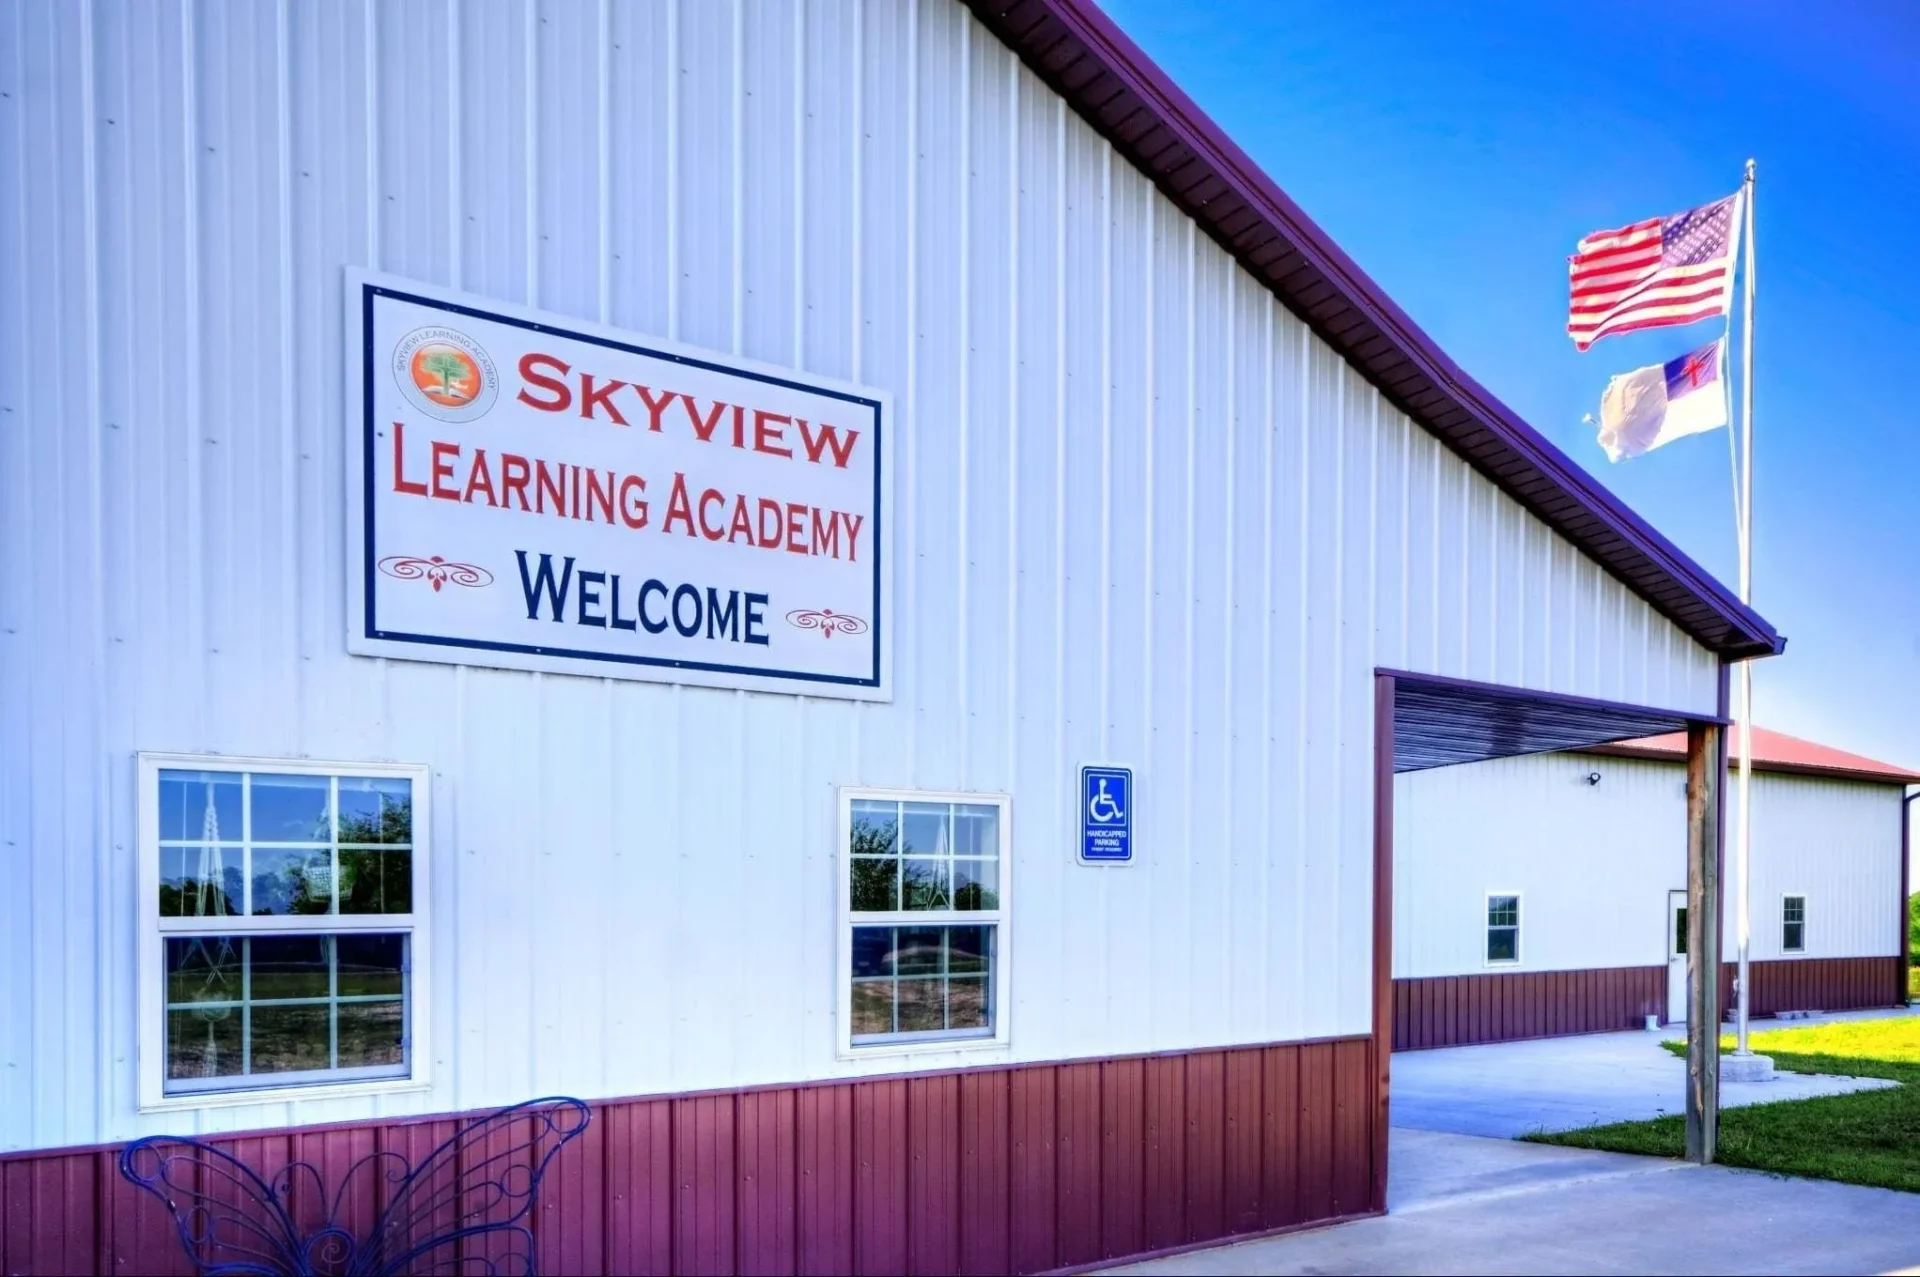 Skyview Learning Academy Welcome